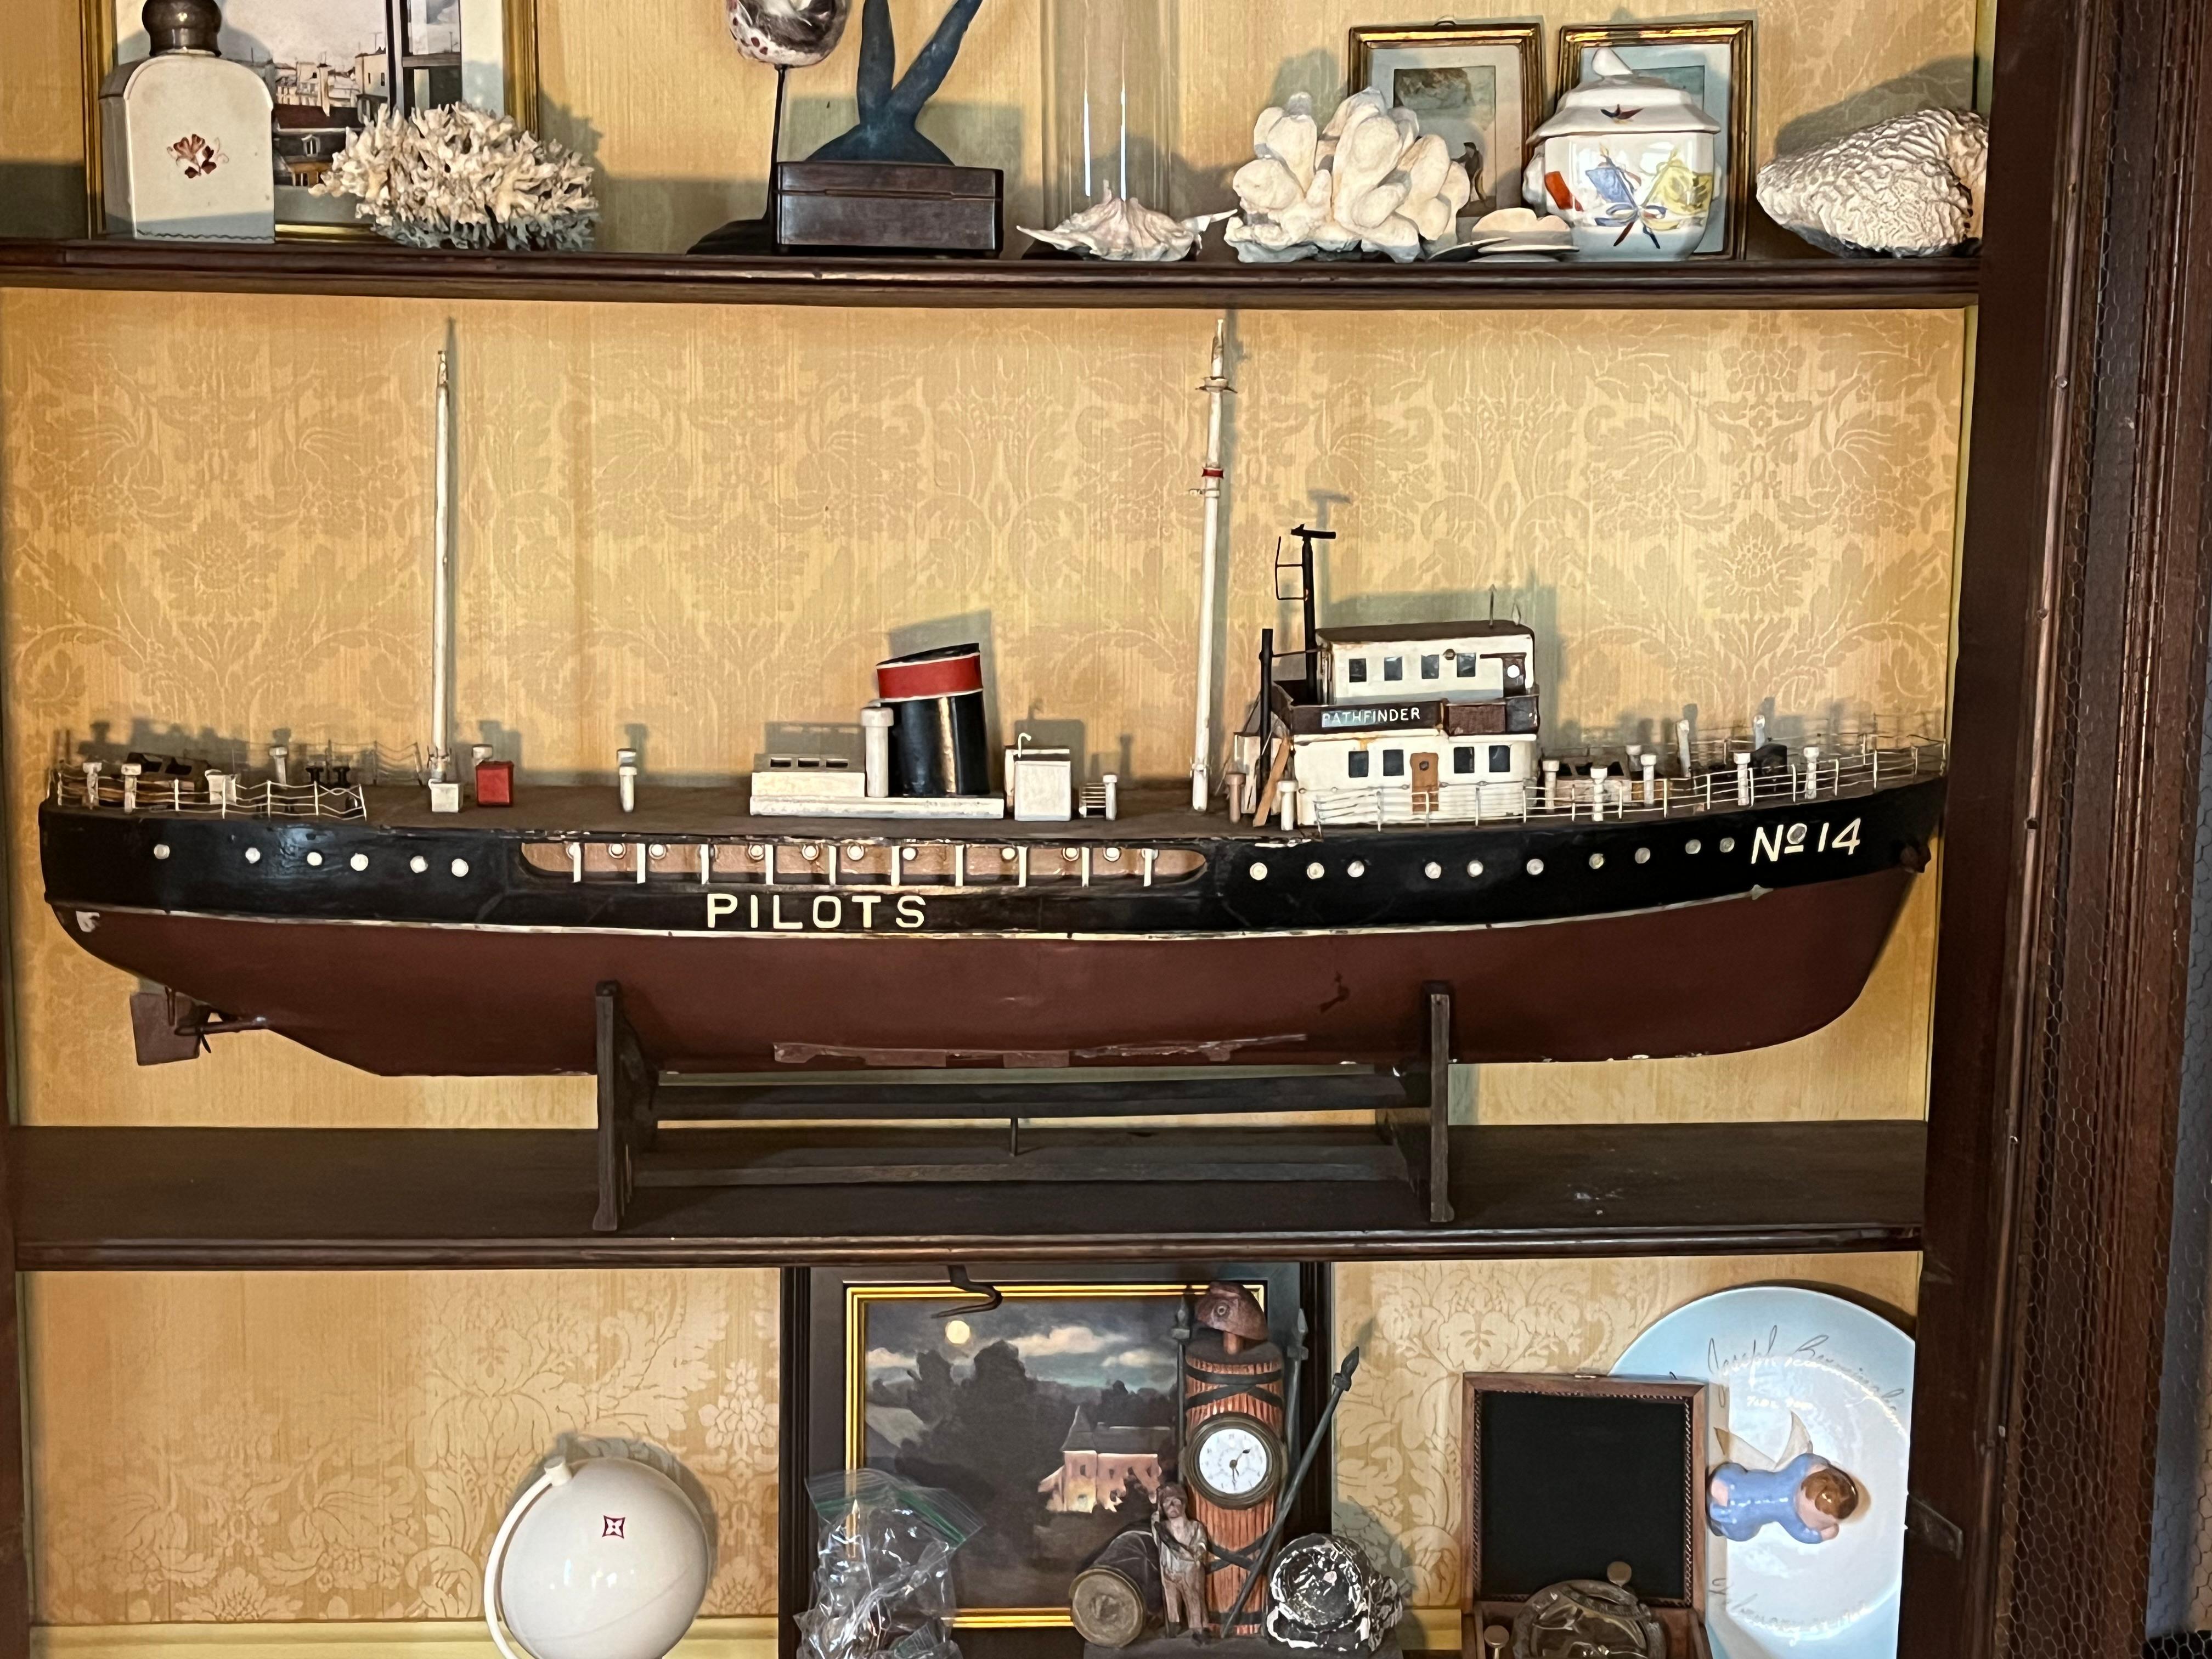 An interesting and finely detailed hand-made model of Pathfinder, an early 20th century pilot ship. Ships such as these were (and still are) invaluable in maneuvering larger ships into and out of berths and harbors. The model sits in a custom cradle